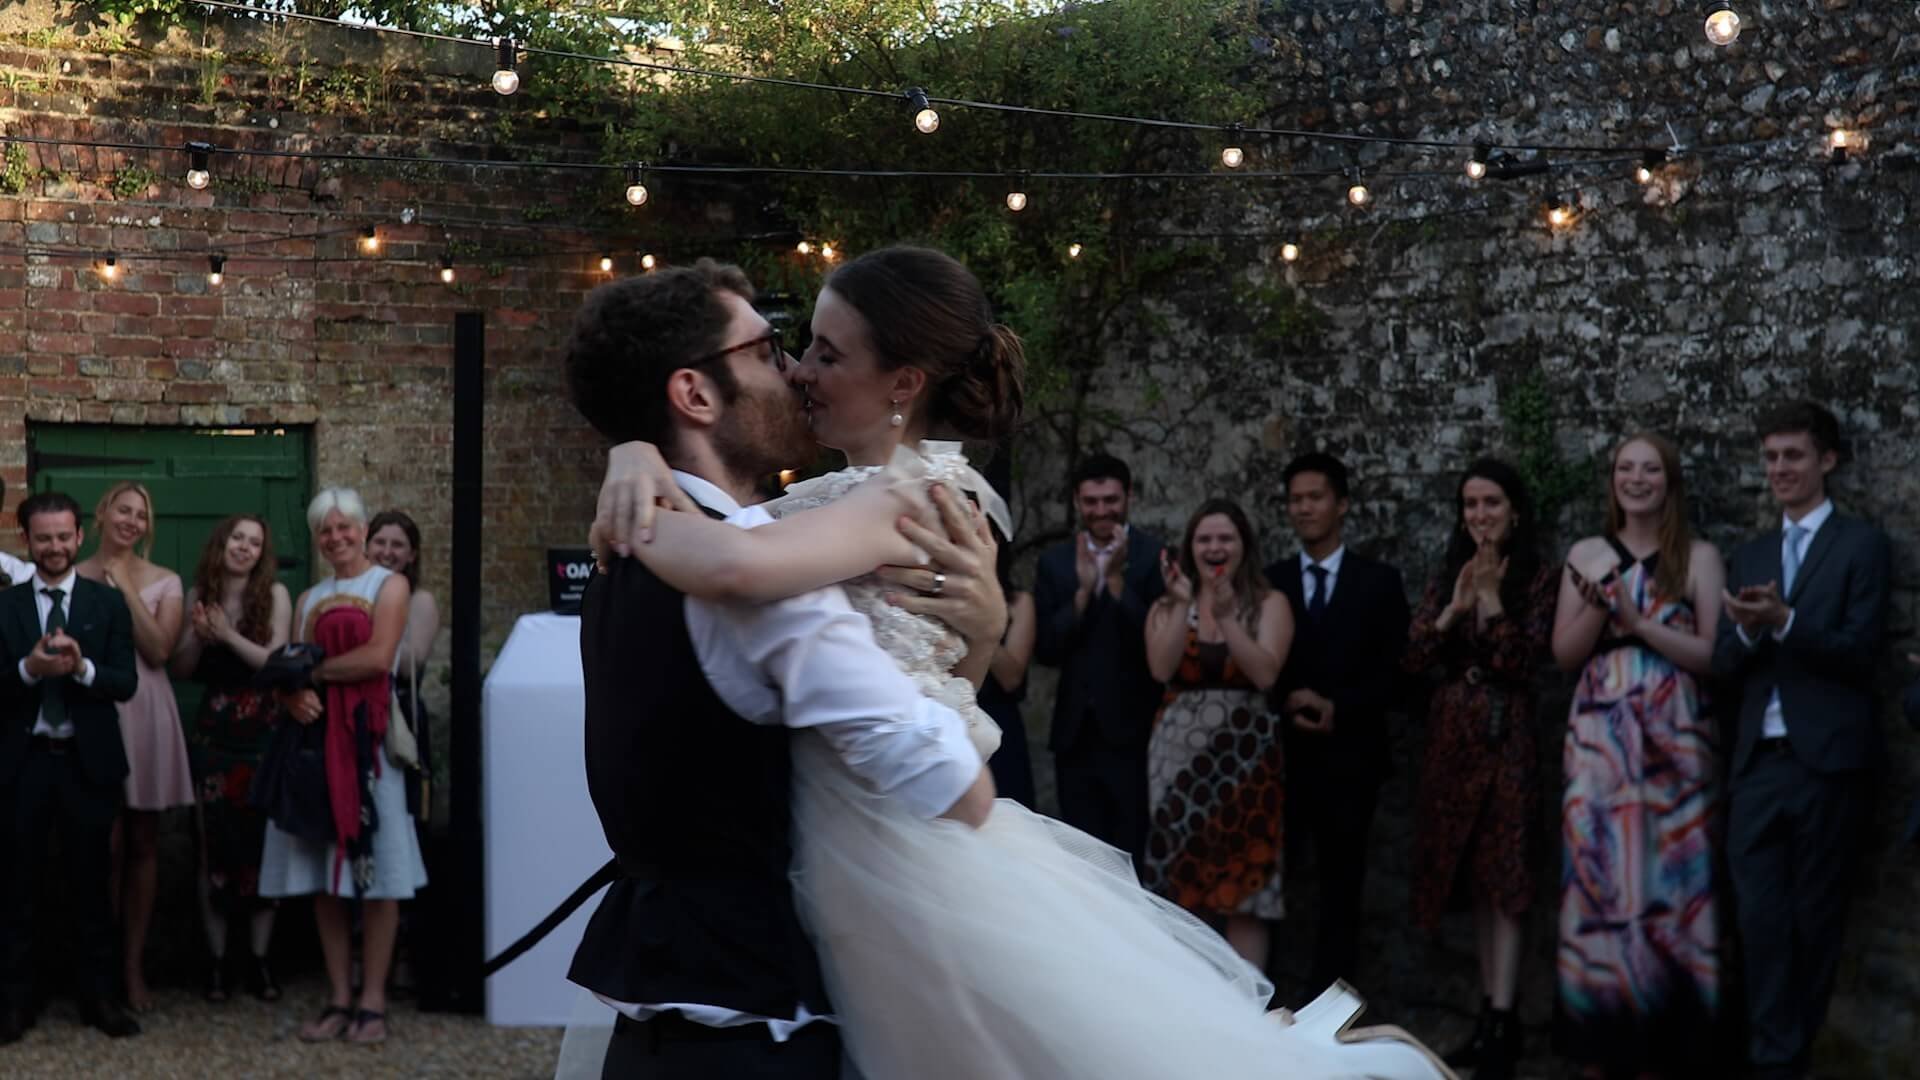 Callum embraces Toni and kisses her during the first dance at Bignor Park